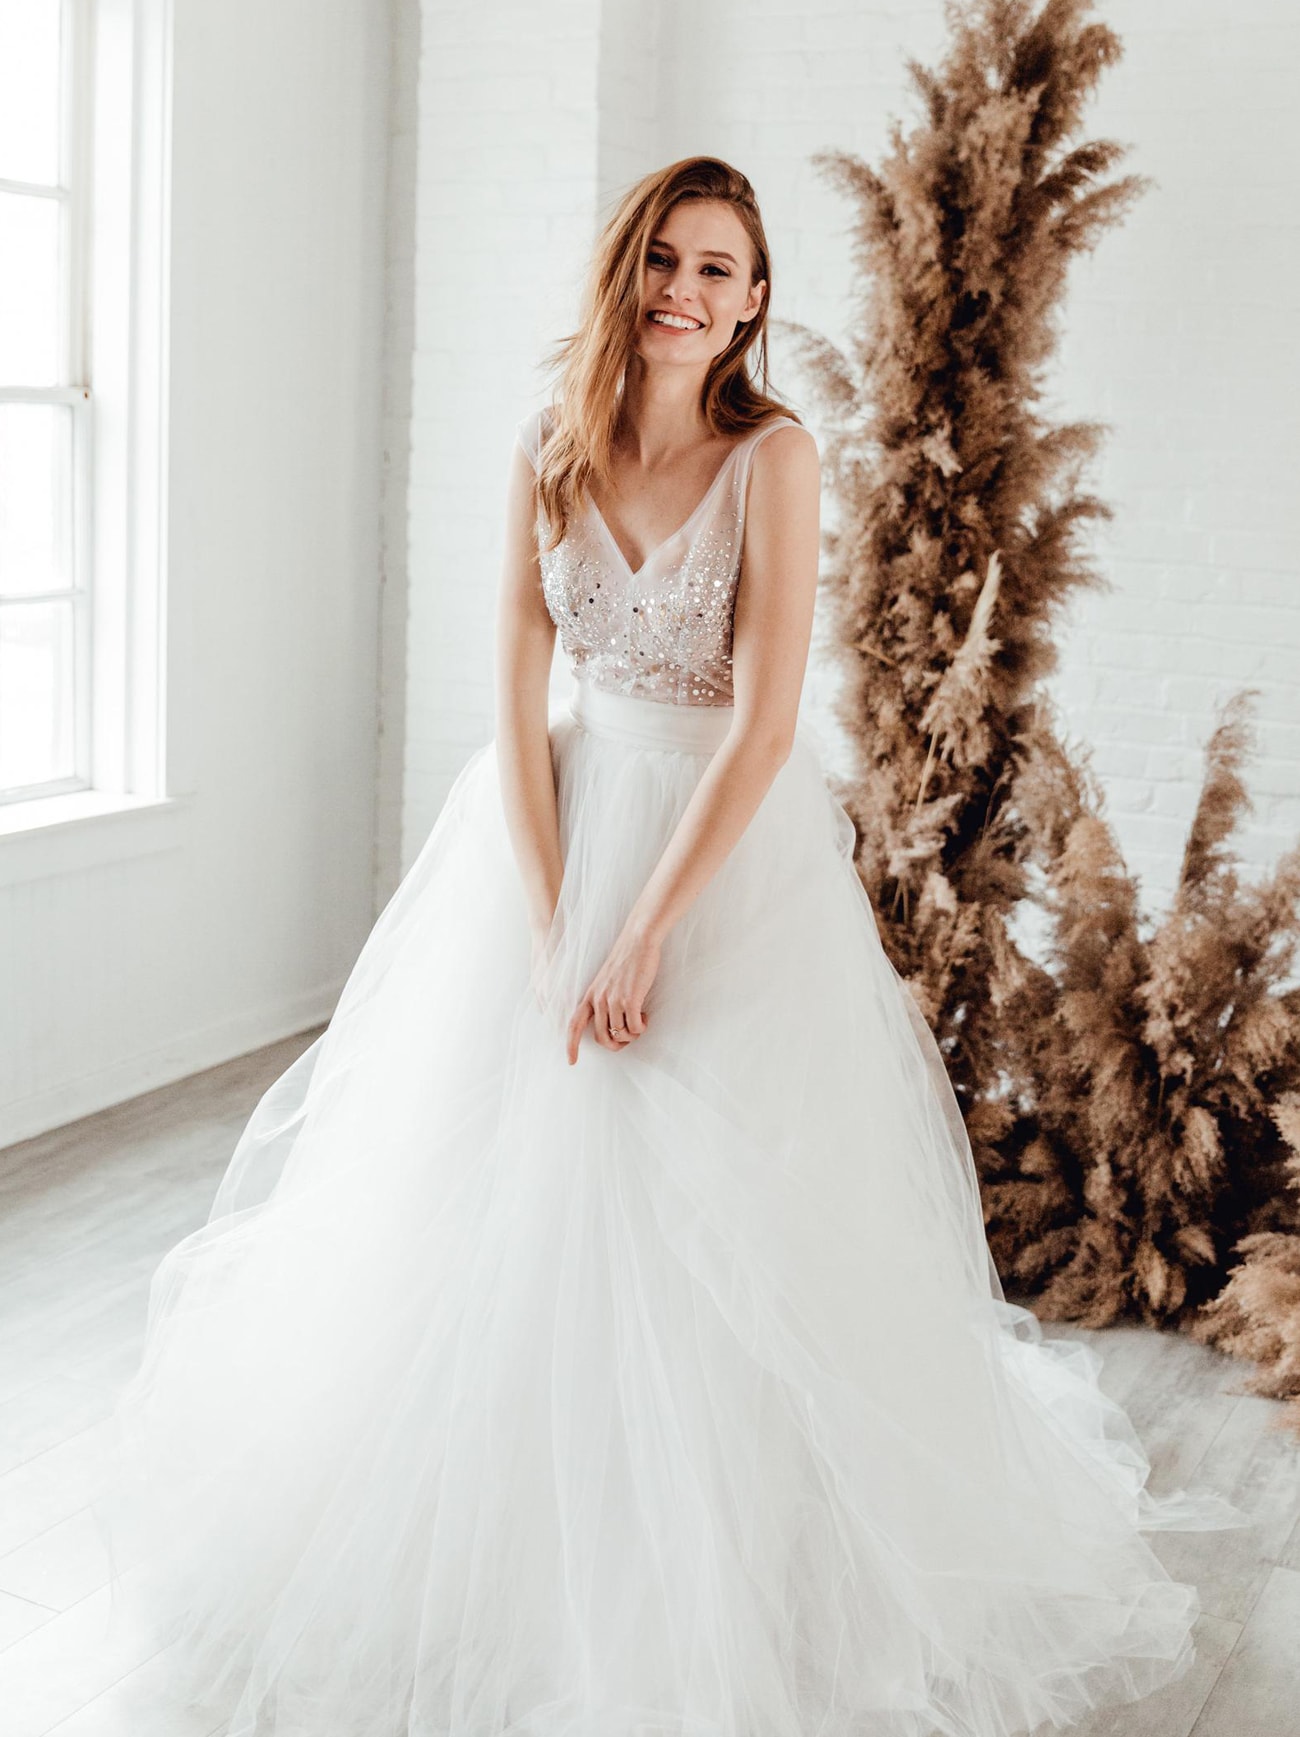 Wedding Dresses for Pear or Triangle Shape Brides